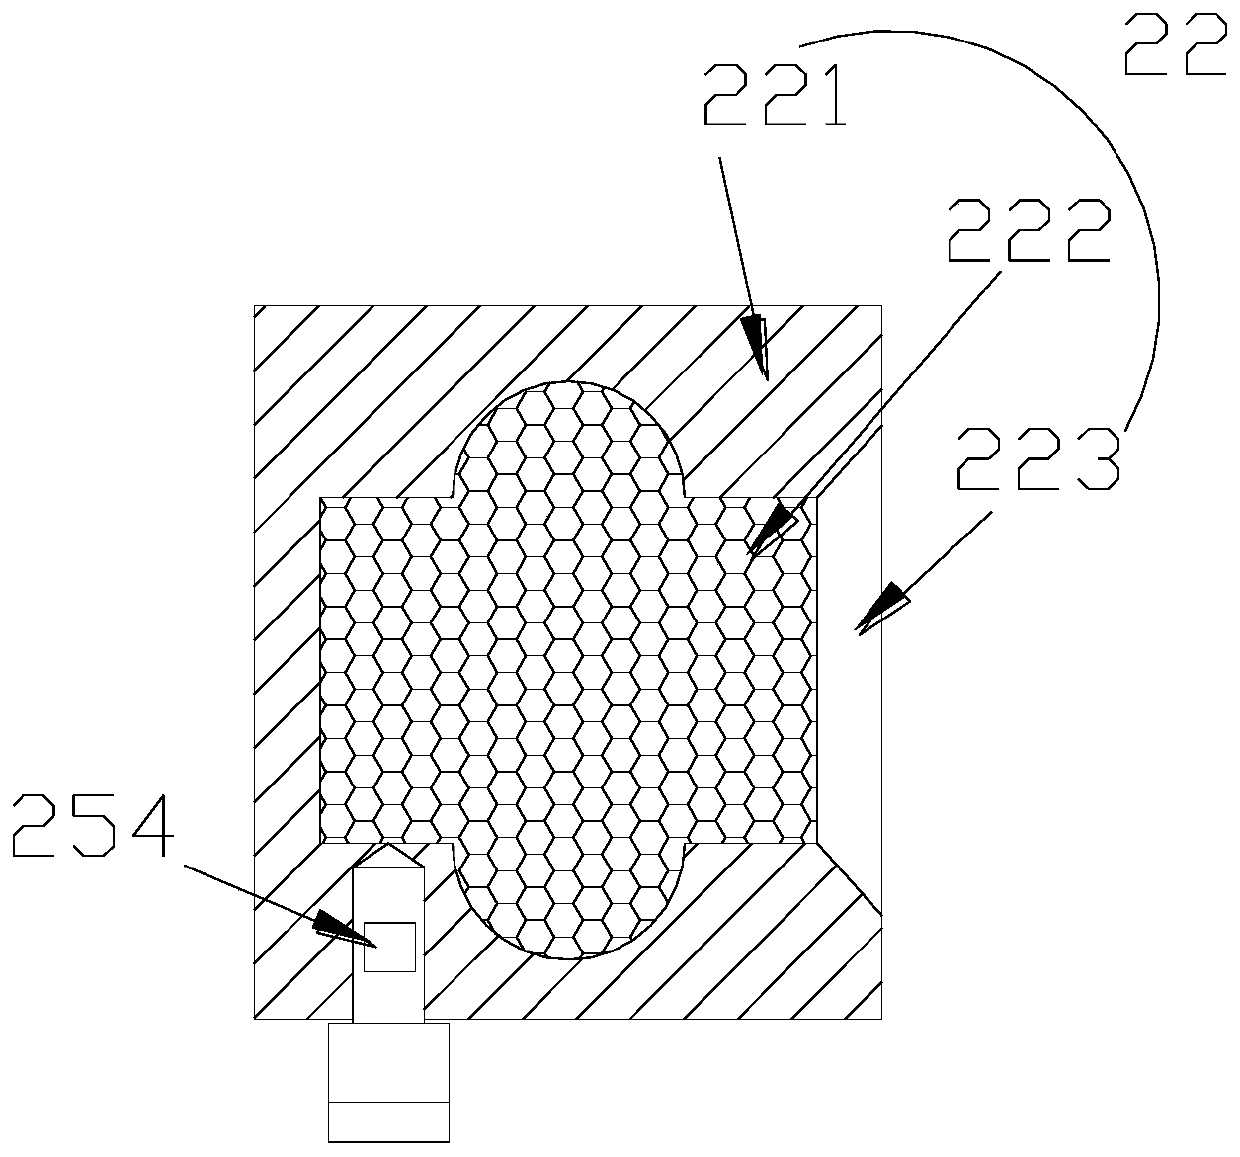 A car windshield cleaning device that uses deformation to automatically adhere to curved surfaces